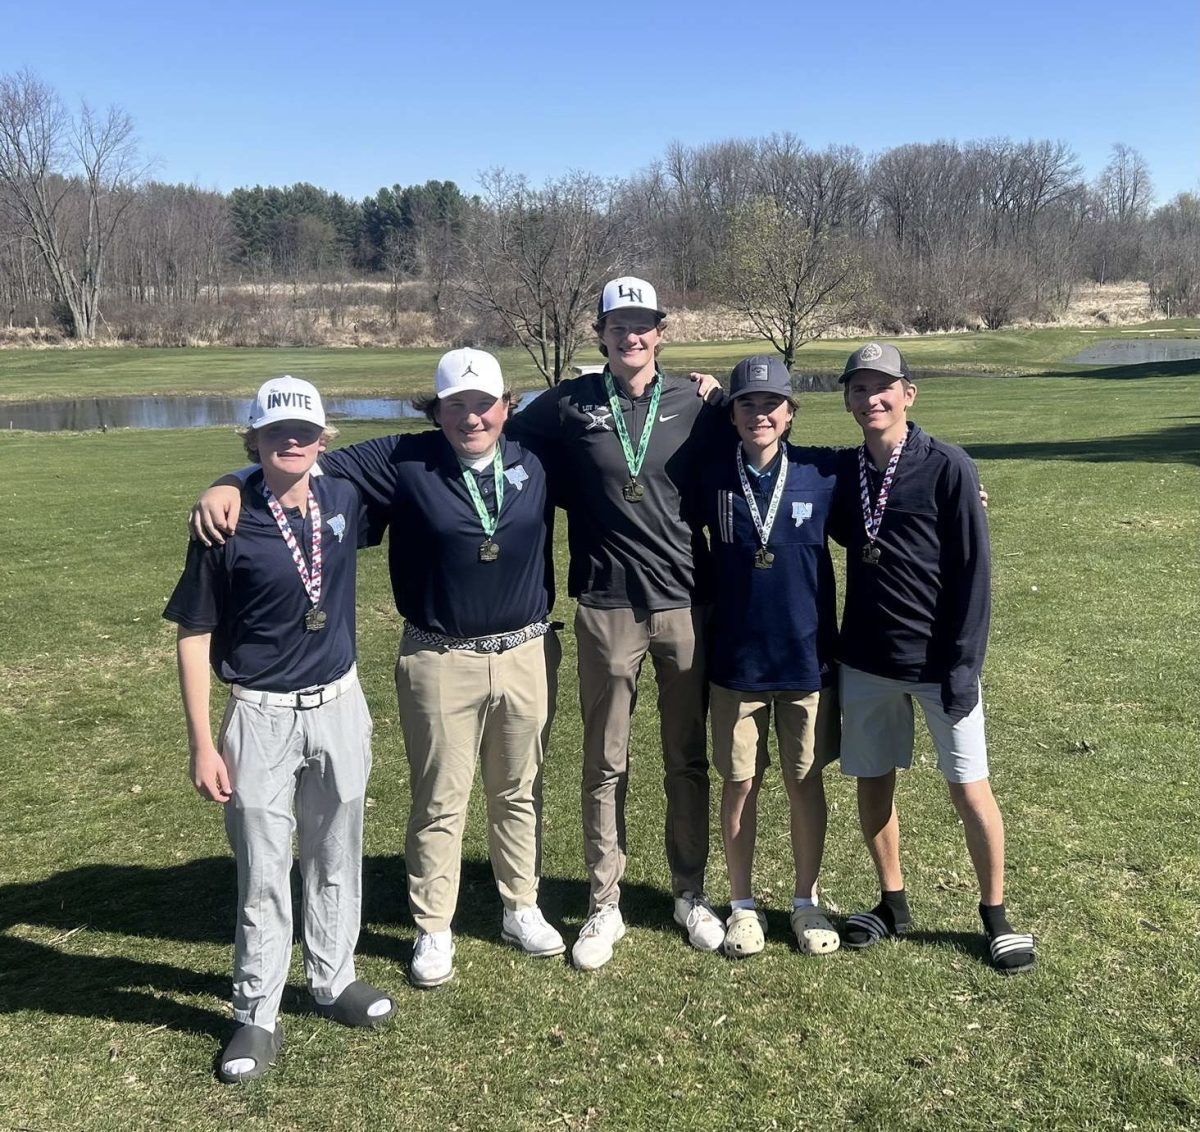 Members+of+the+golf+team%2C+%28from+left+to+right%29+Samuel+Gagie%2C+Xander+Gorham%2C+Isaac+Scarvarda%2C+Griffin+Moore+and+Aaron+Teal%2C+stand+arm+in+arm+after+a+tough+victory+in+one+of+their+tournaments.+They+all+played+their+hardest+and+are+happy+to+earn+this+win.+